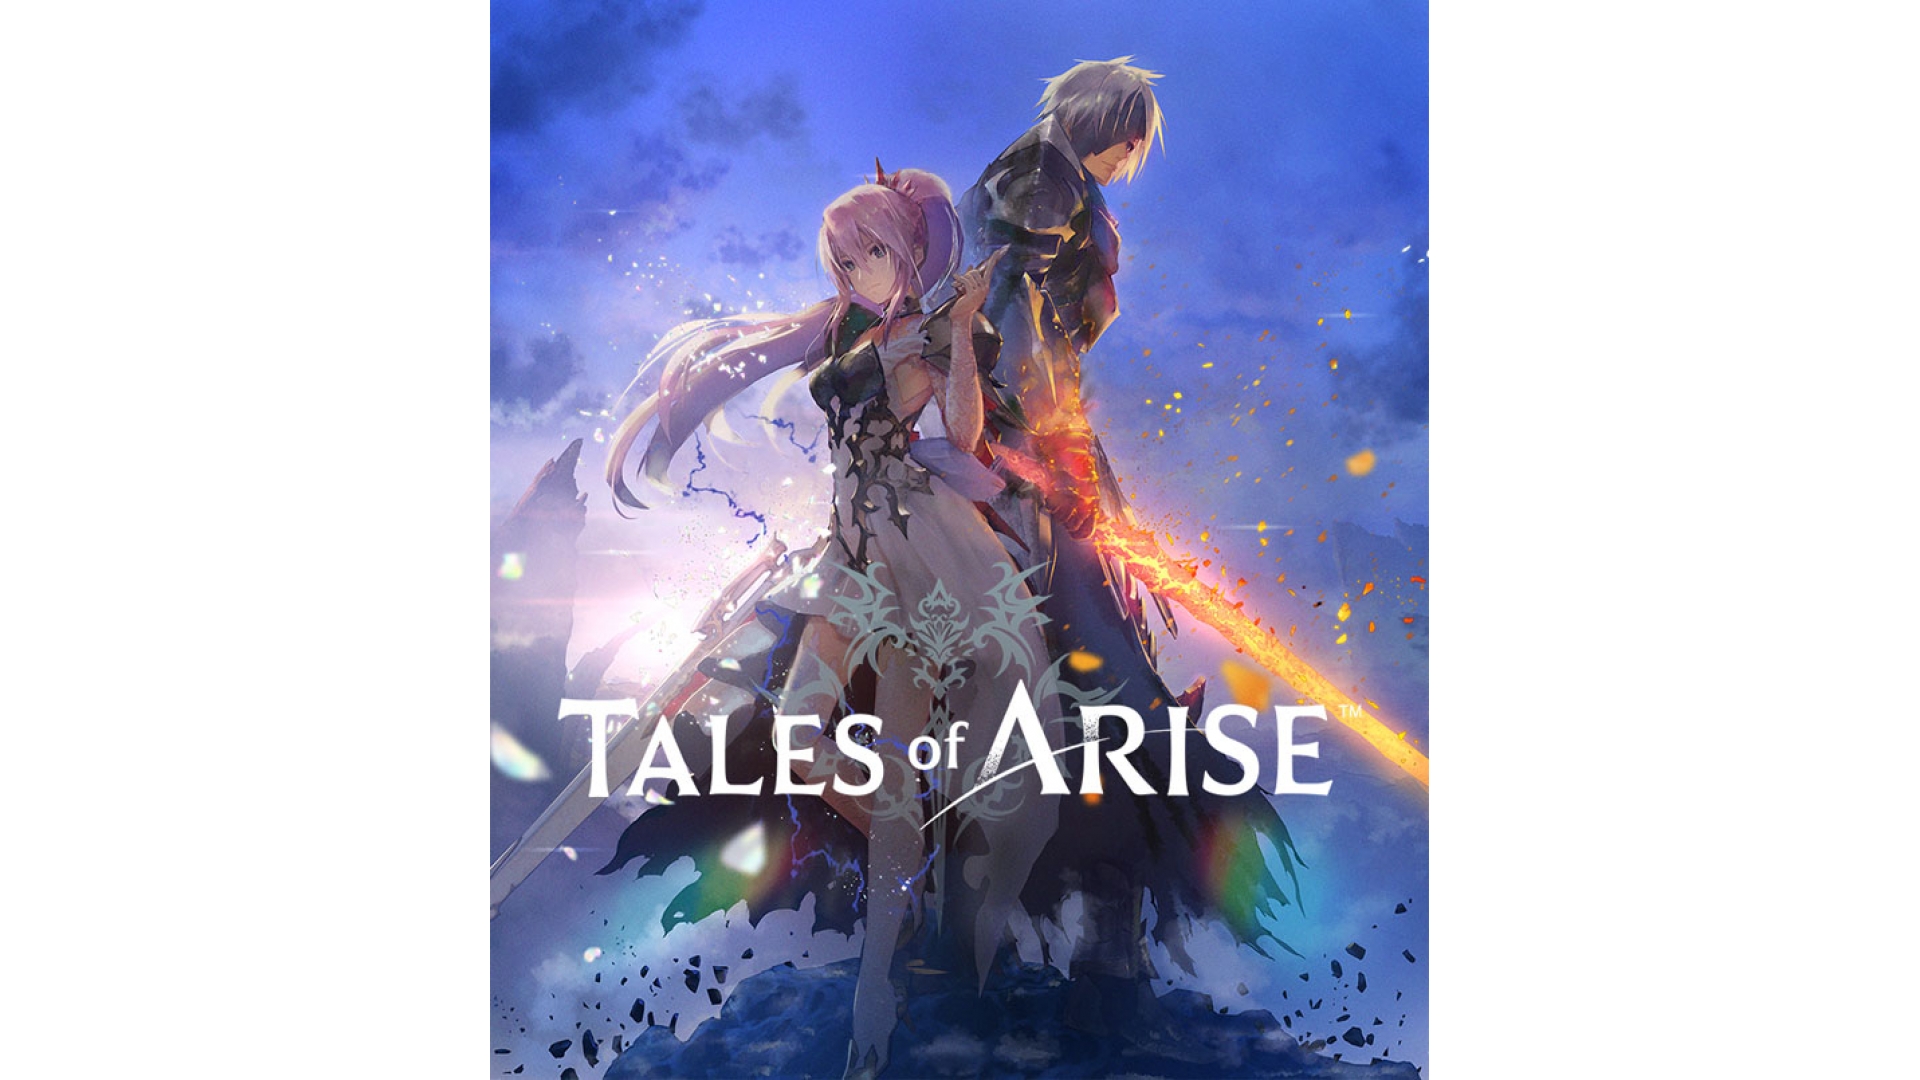 Arise ps4. Tales of Arise ps4 диск. Tales of Arise [ps4]. Tales of Arise Sony ps4 диск. Tales of Arise ps4 обложка.